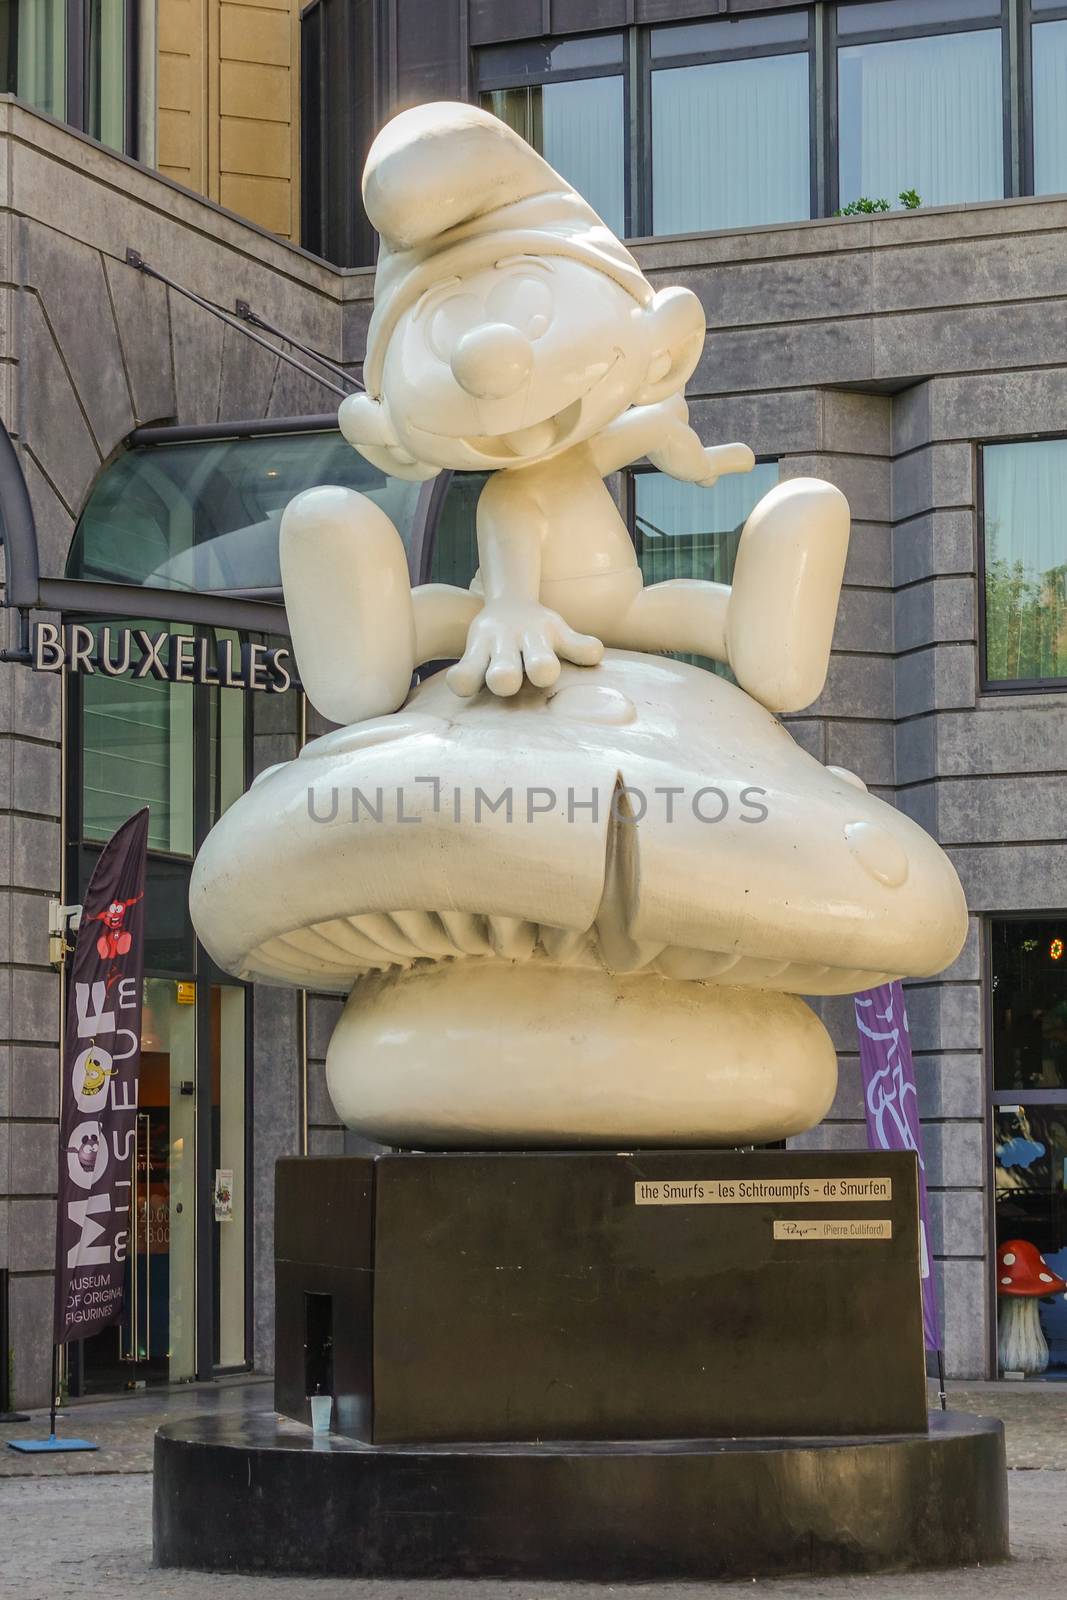 Brussels, Belgium - June 22, 2019: Large white statue of one Smurf on black pedestal in front of MOOF museum.